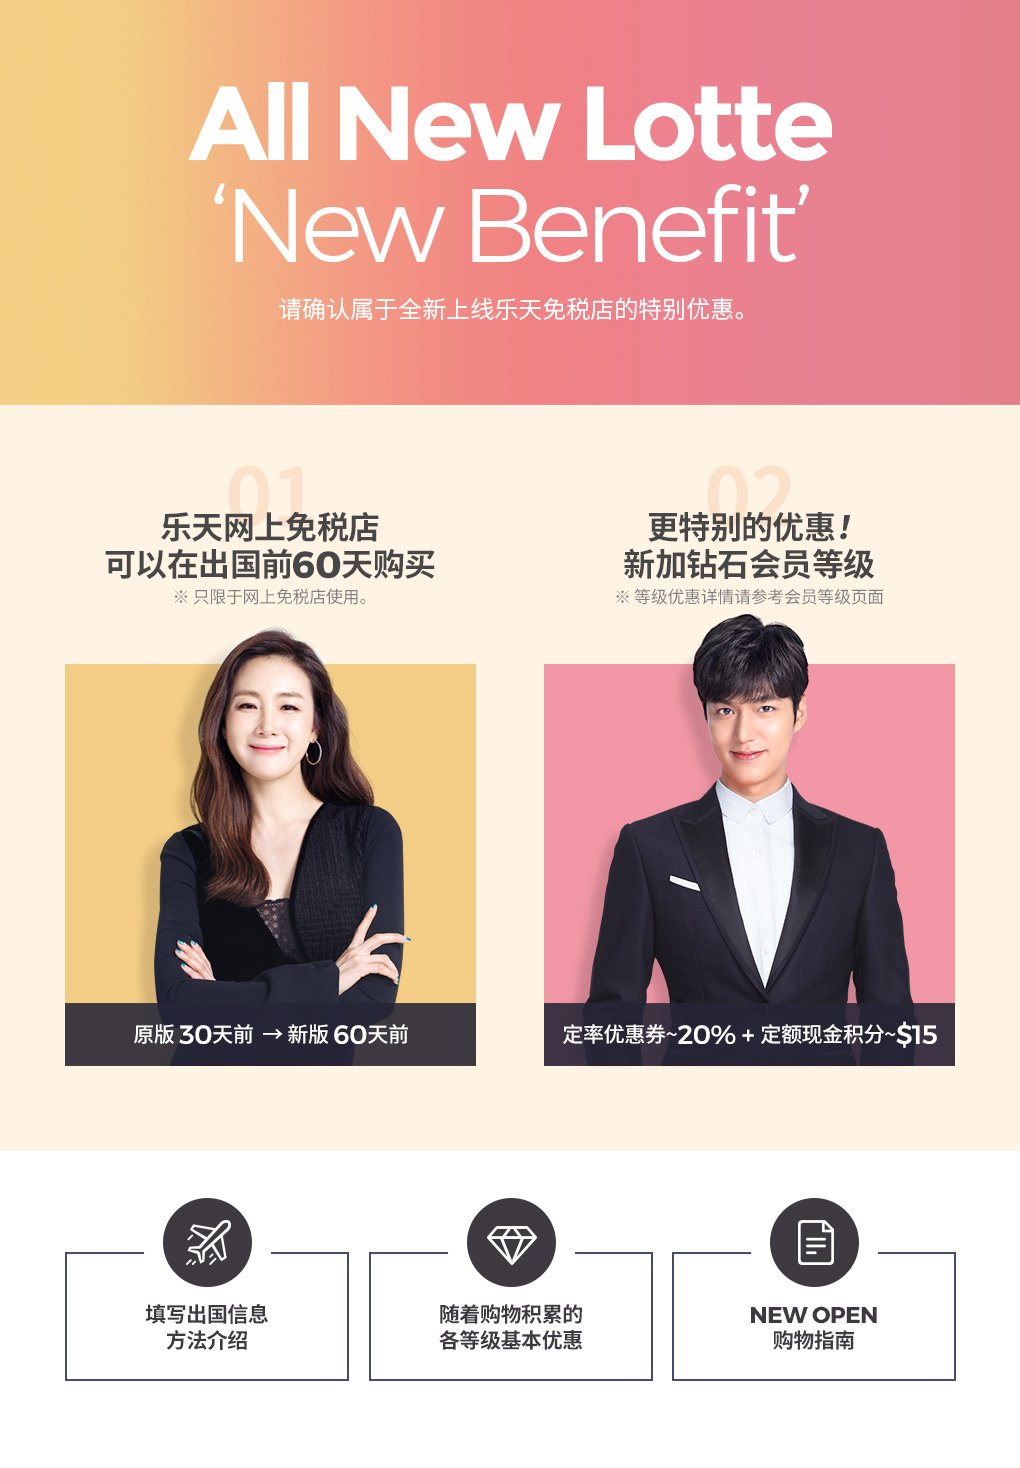 All New Lotte New Benefit